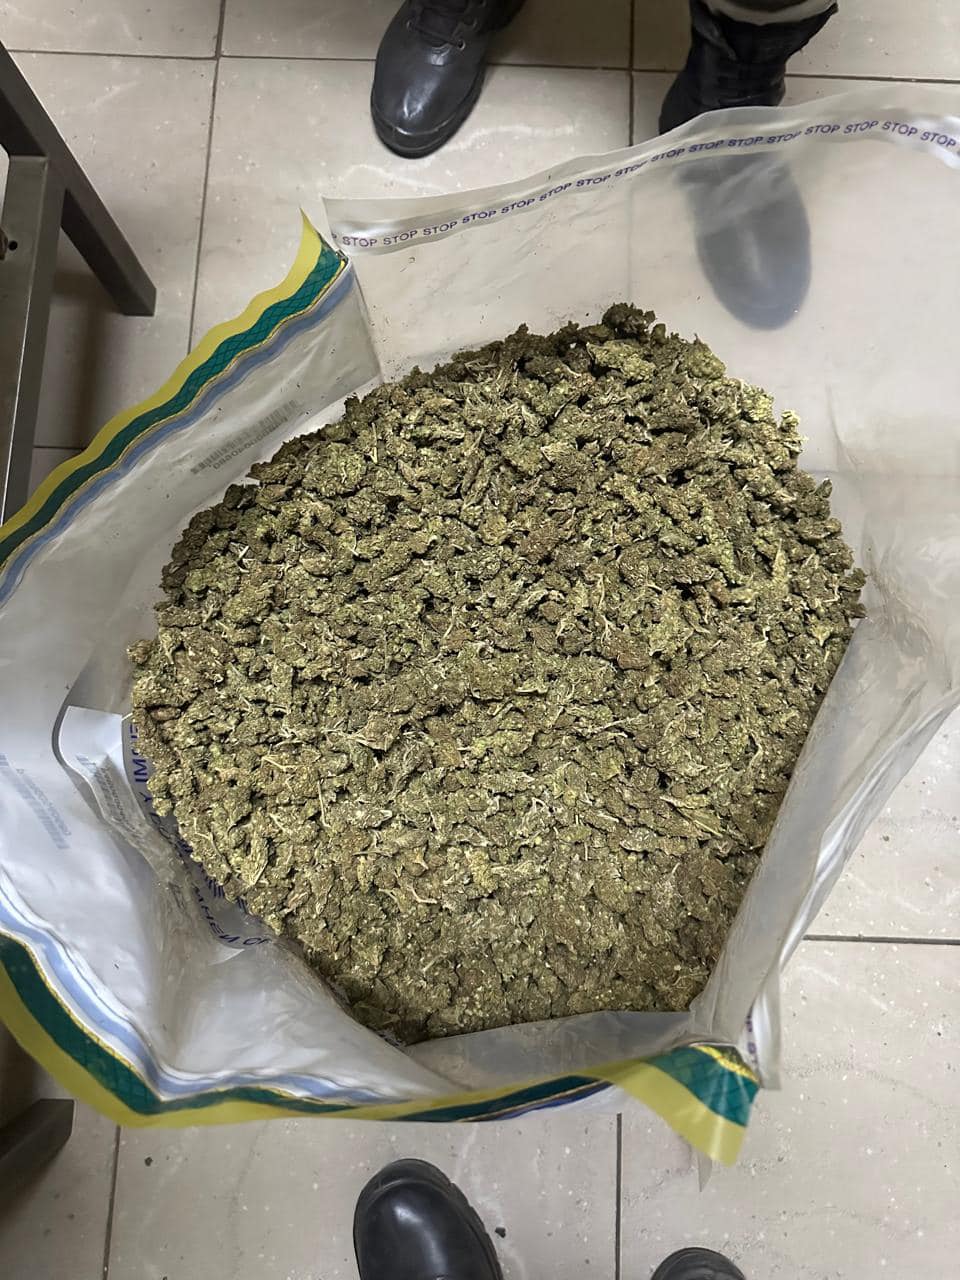 Thousands worth of dagga confiscated in the Daveyton area